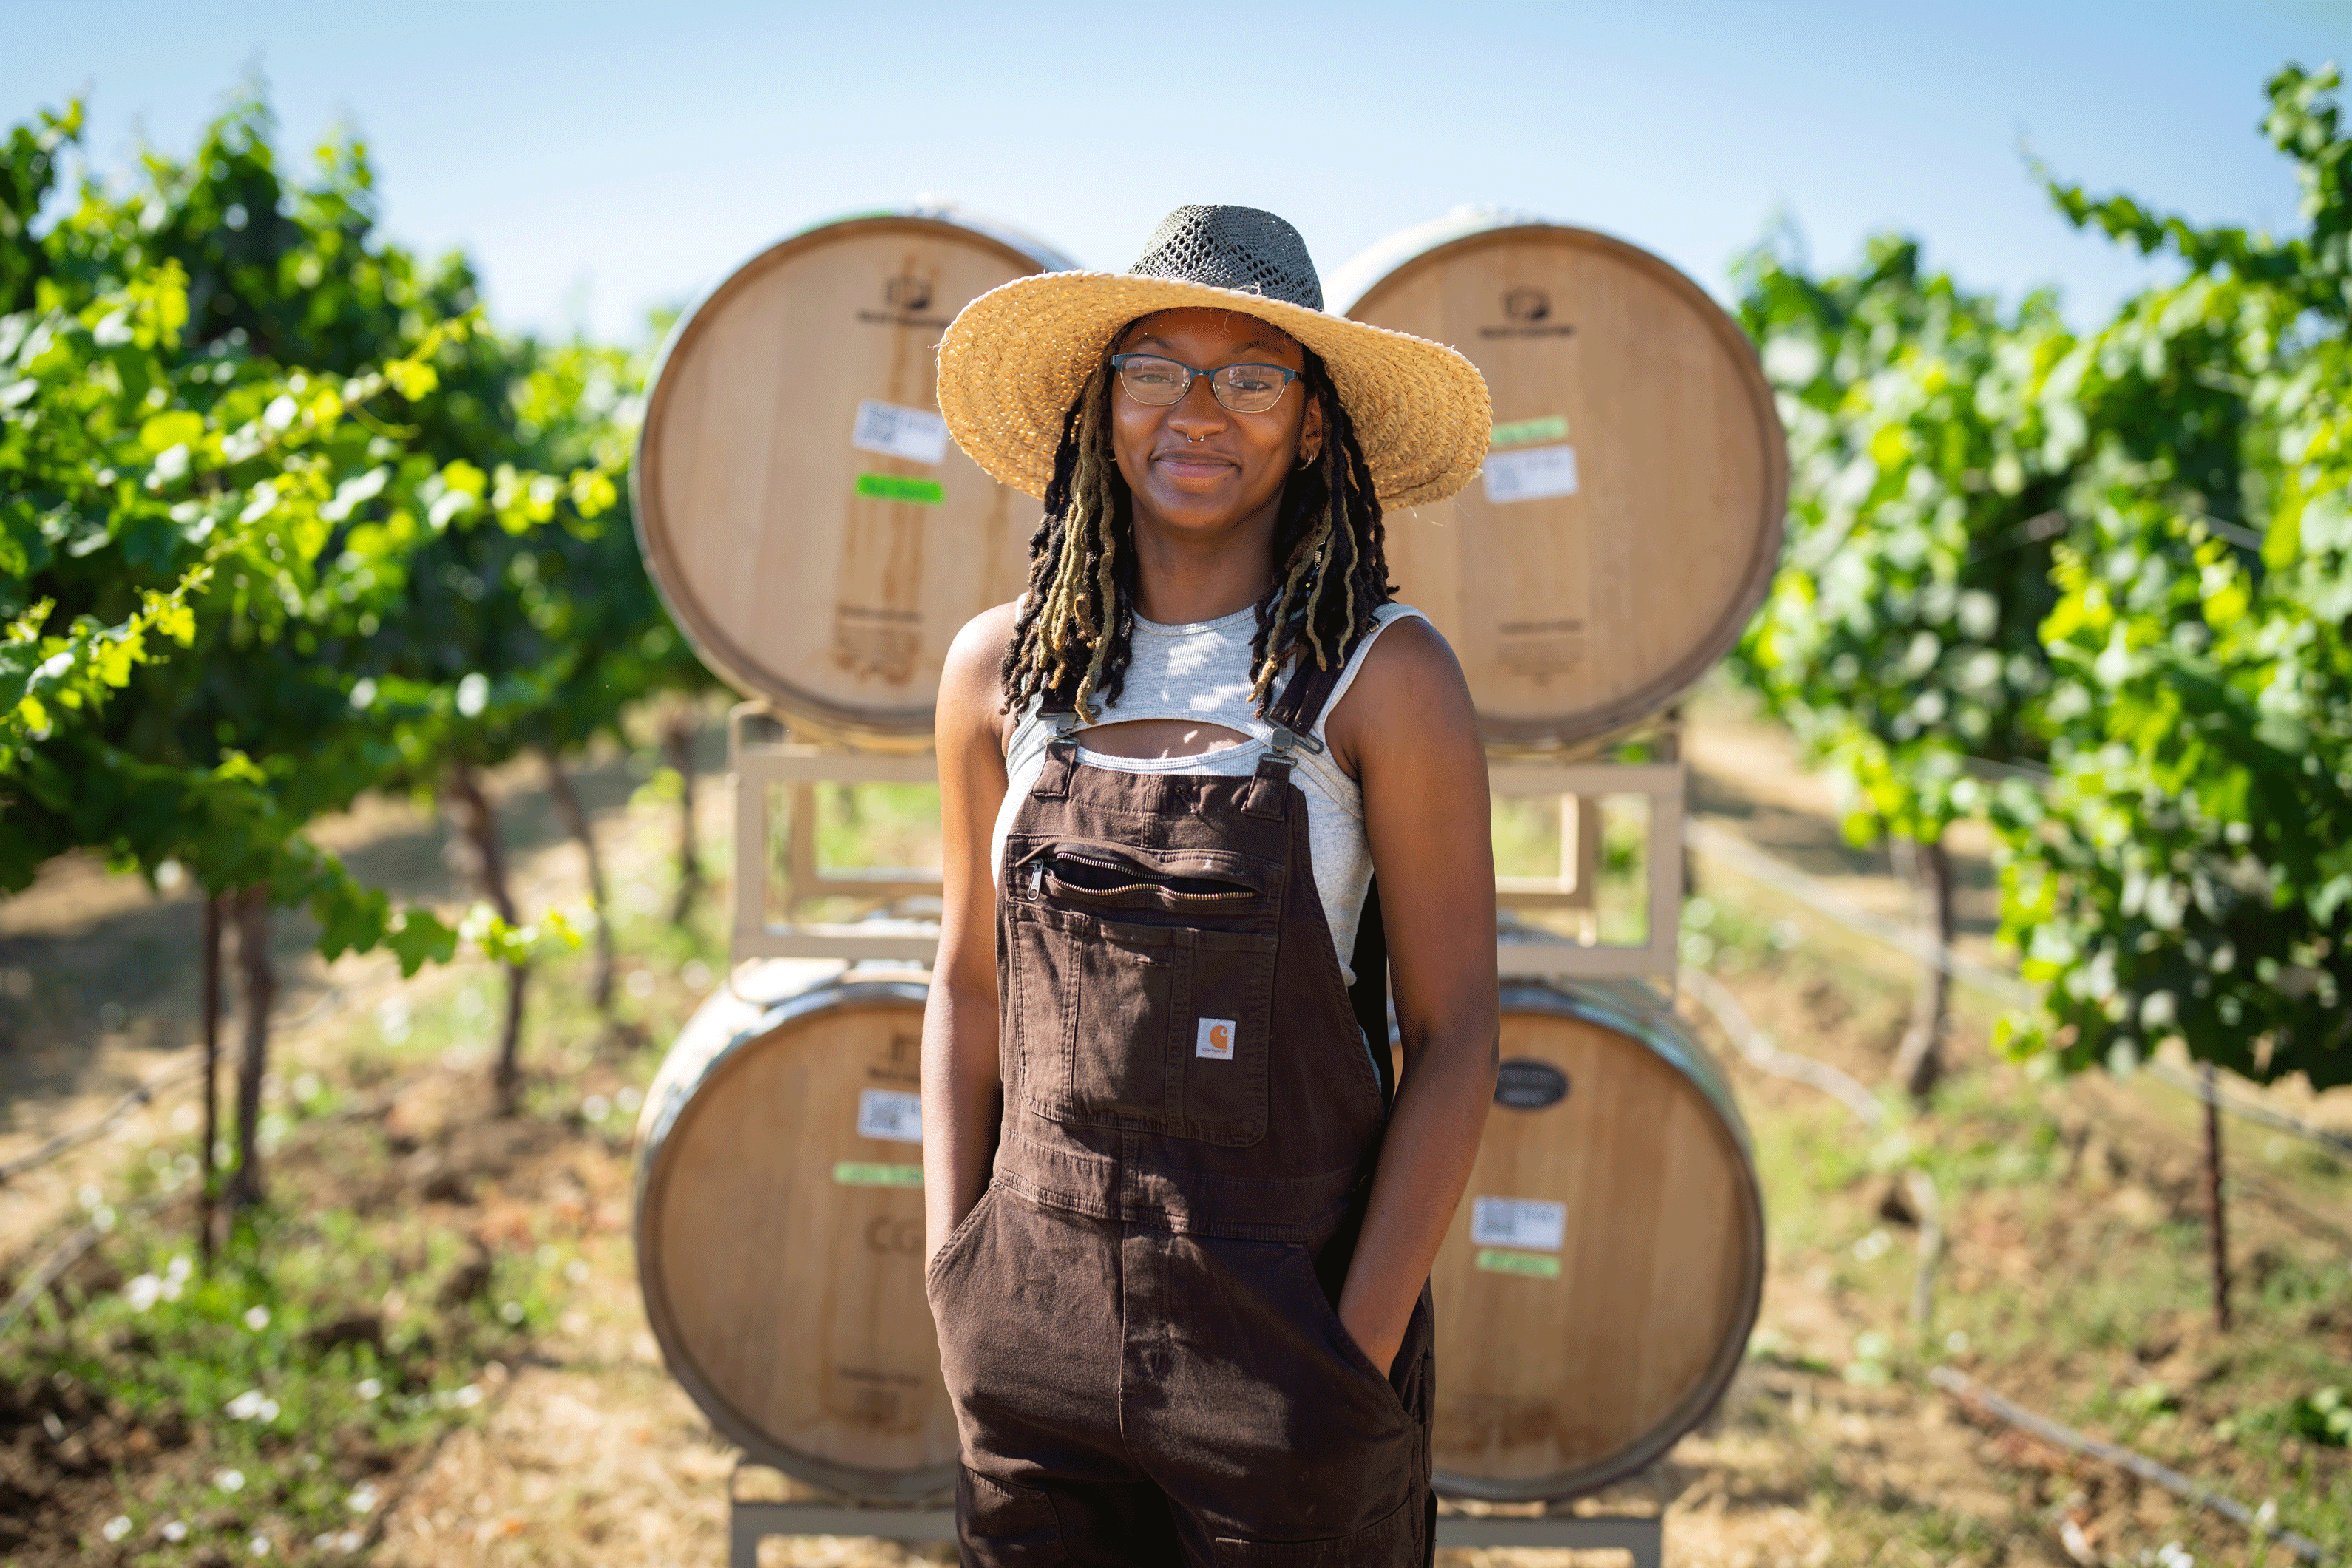 Florida A&M student Eryse White in the vineyards at the Robert Mondavi Institute for Wine and Food Science. White was a summer scholar as part of the Plant Agricultural Biology Graduate Admissions Pathways program. (Jael Mackendorf / UC Davis)